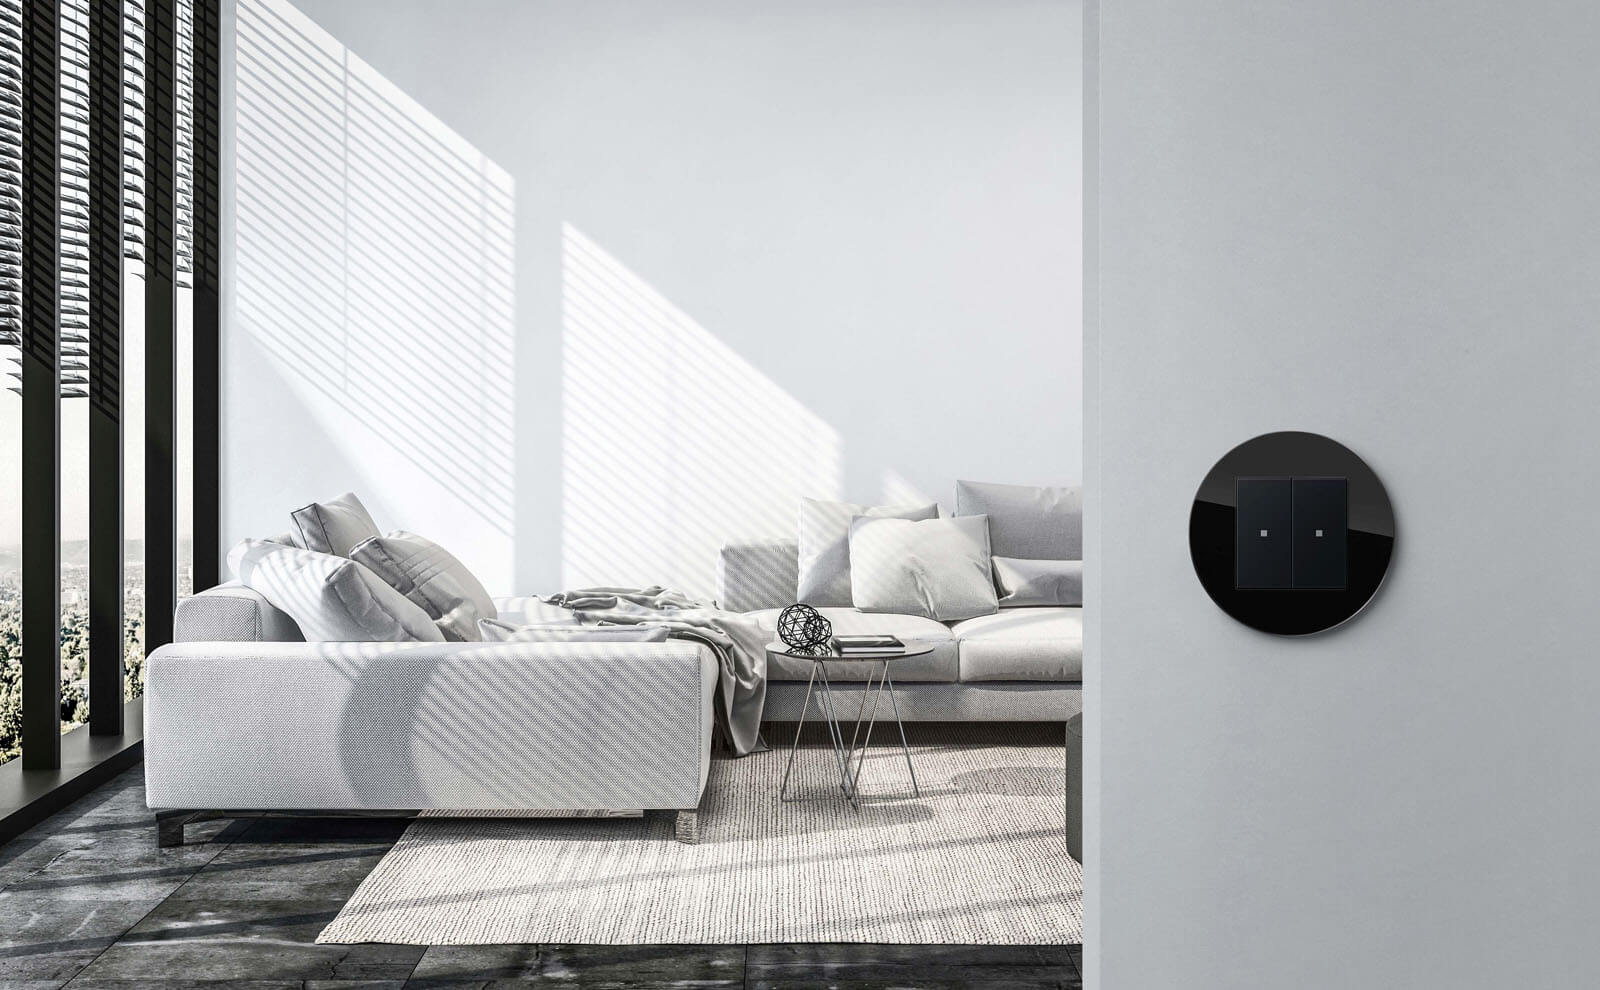 All in one switch: With the Gira button for Gira One & KNX, you control smart technology the oldschool way. Discover our switch designs & options.